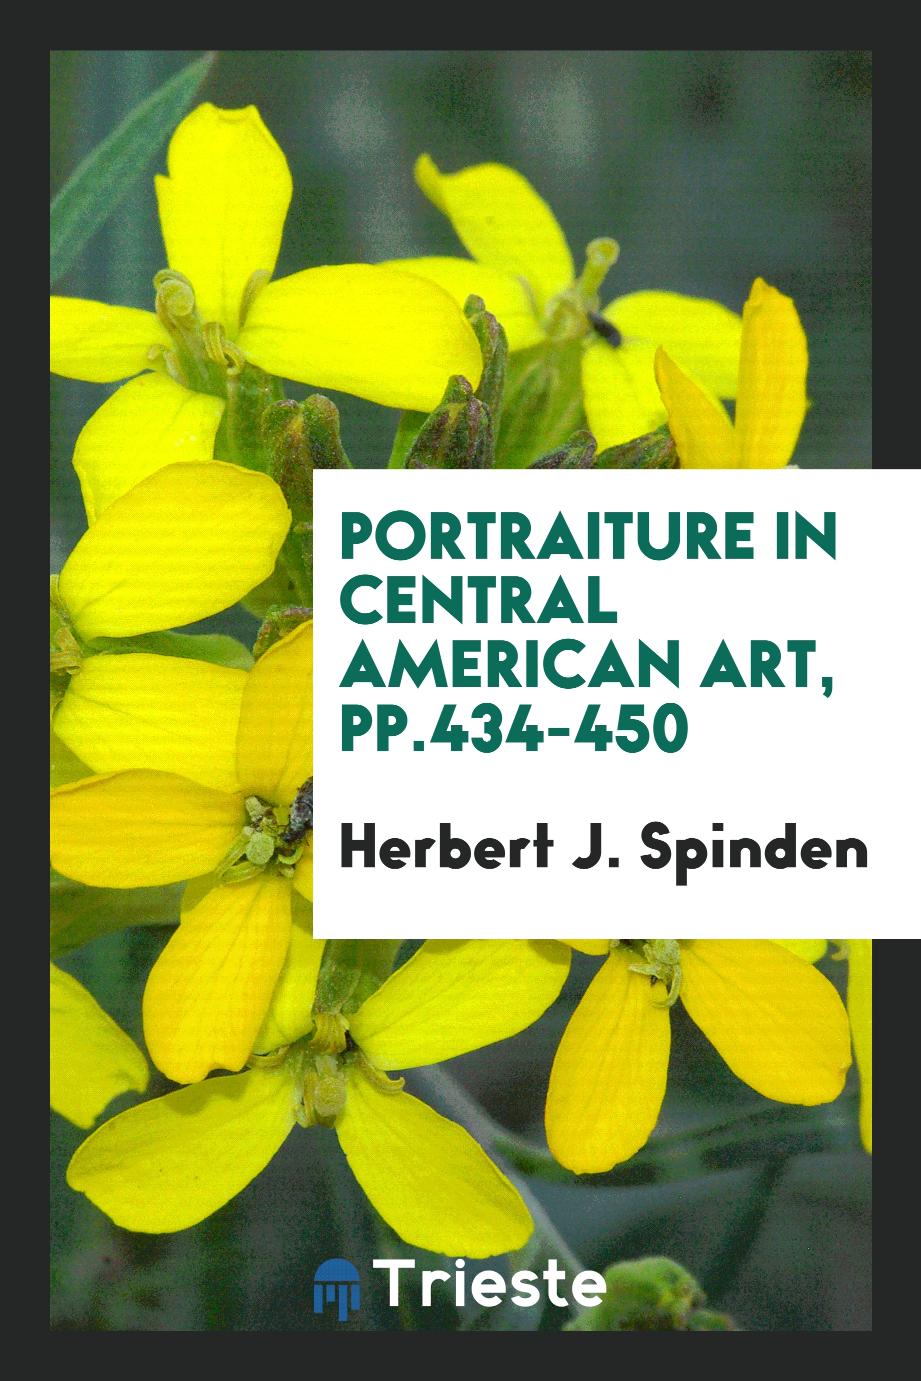 Portraiture in Central American Art, pp.434-450